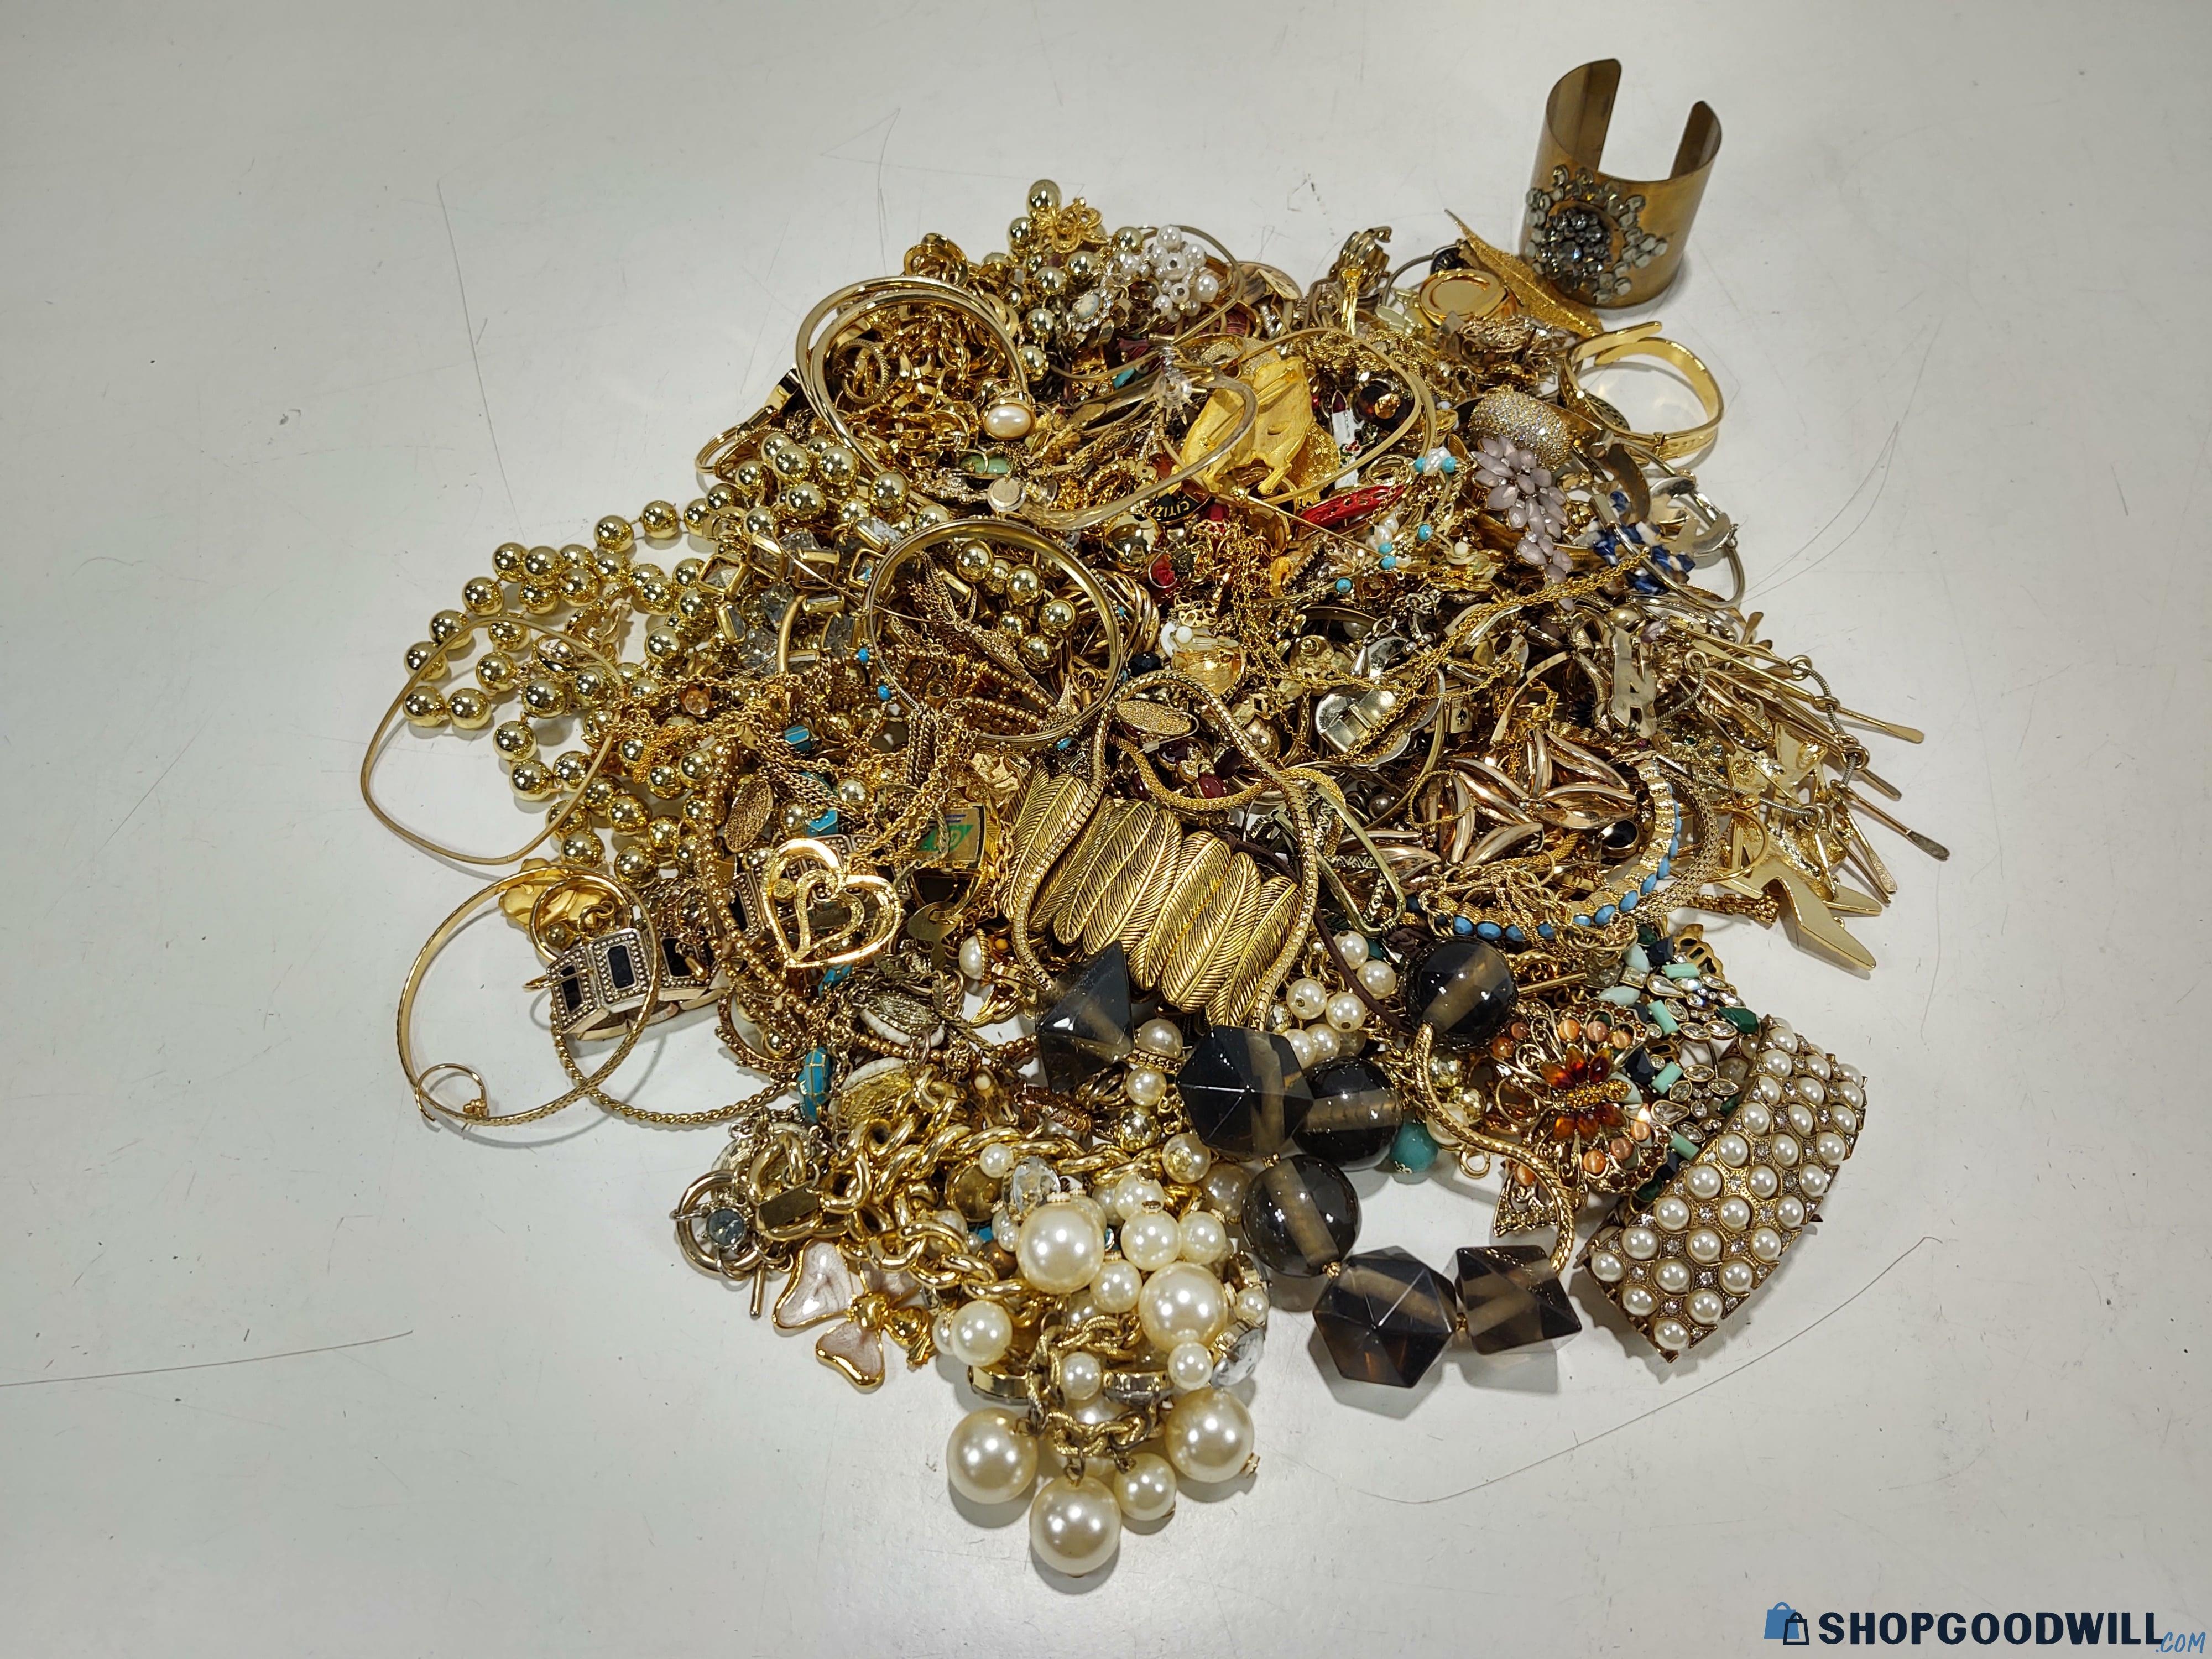 8.70lb Lot of Gold Toned Jewelry (Not Tested) - shopgoodwill.com